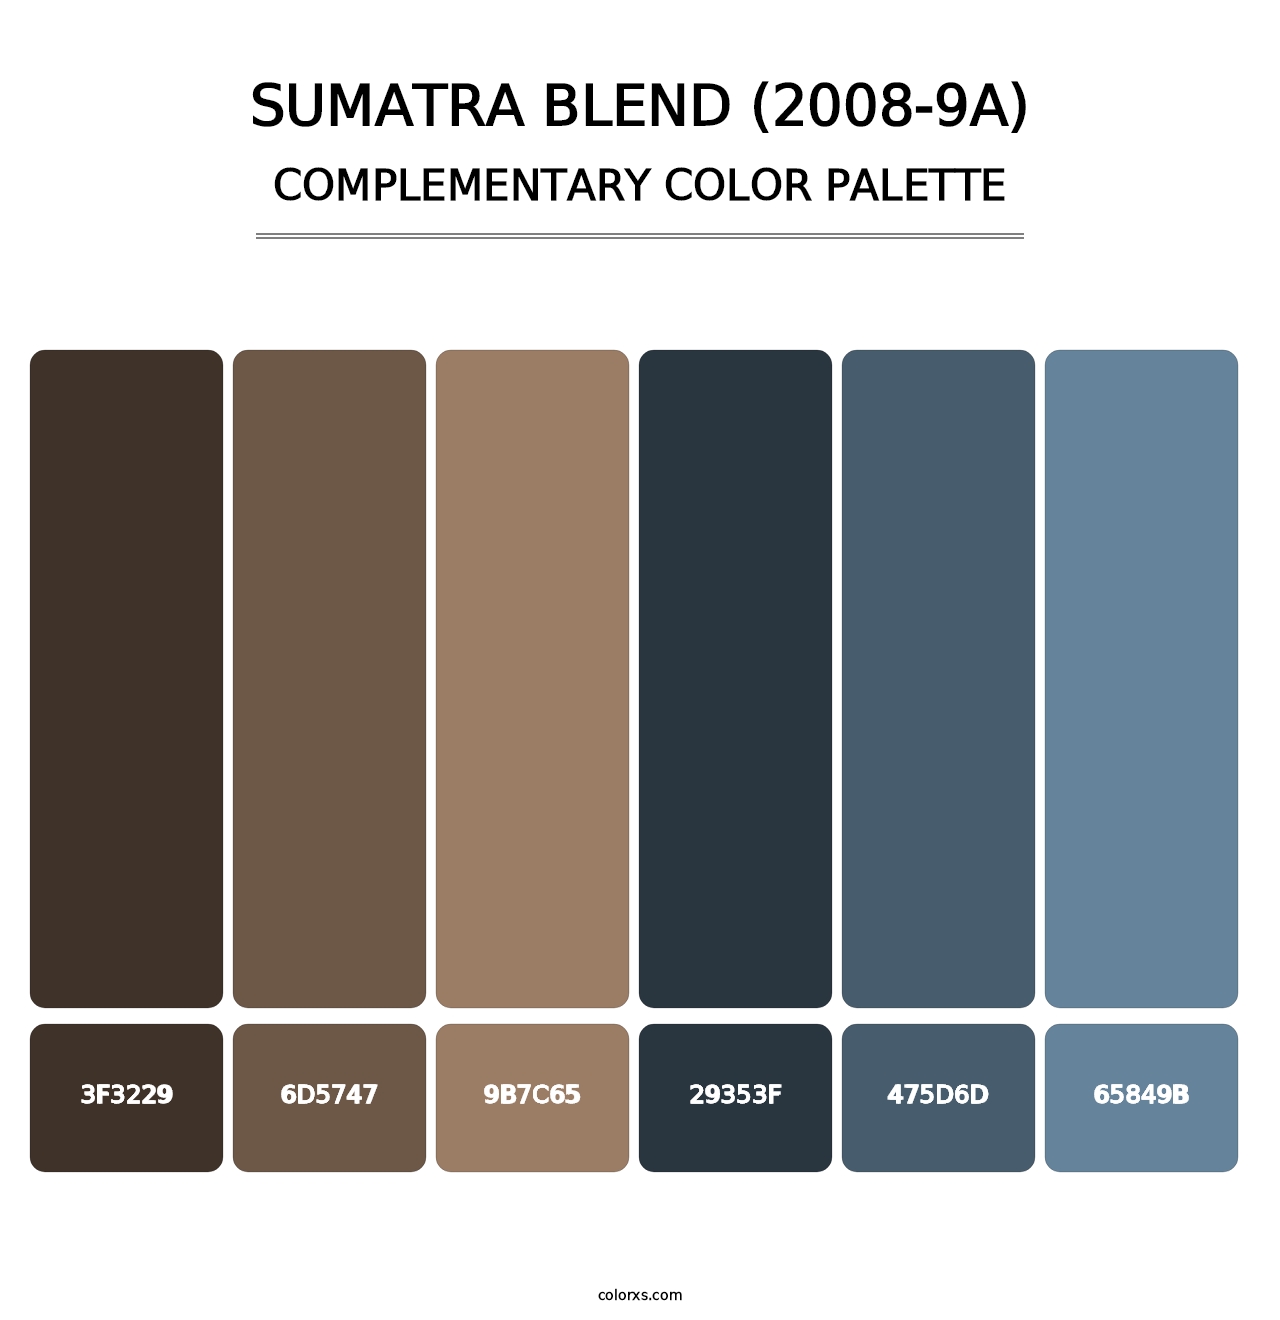 Sumatra Blend (2008-9A) - Complementary Color Palette